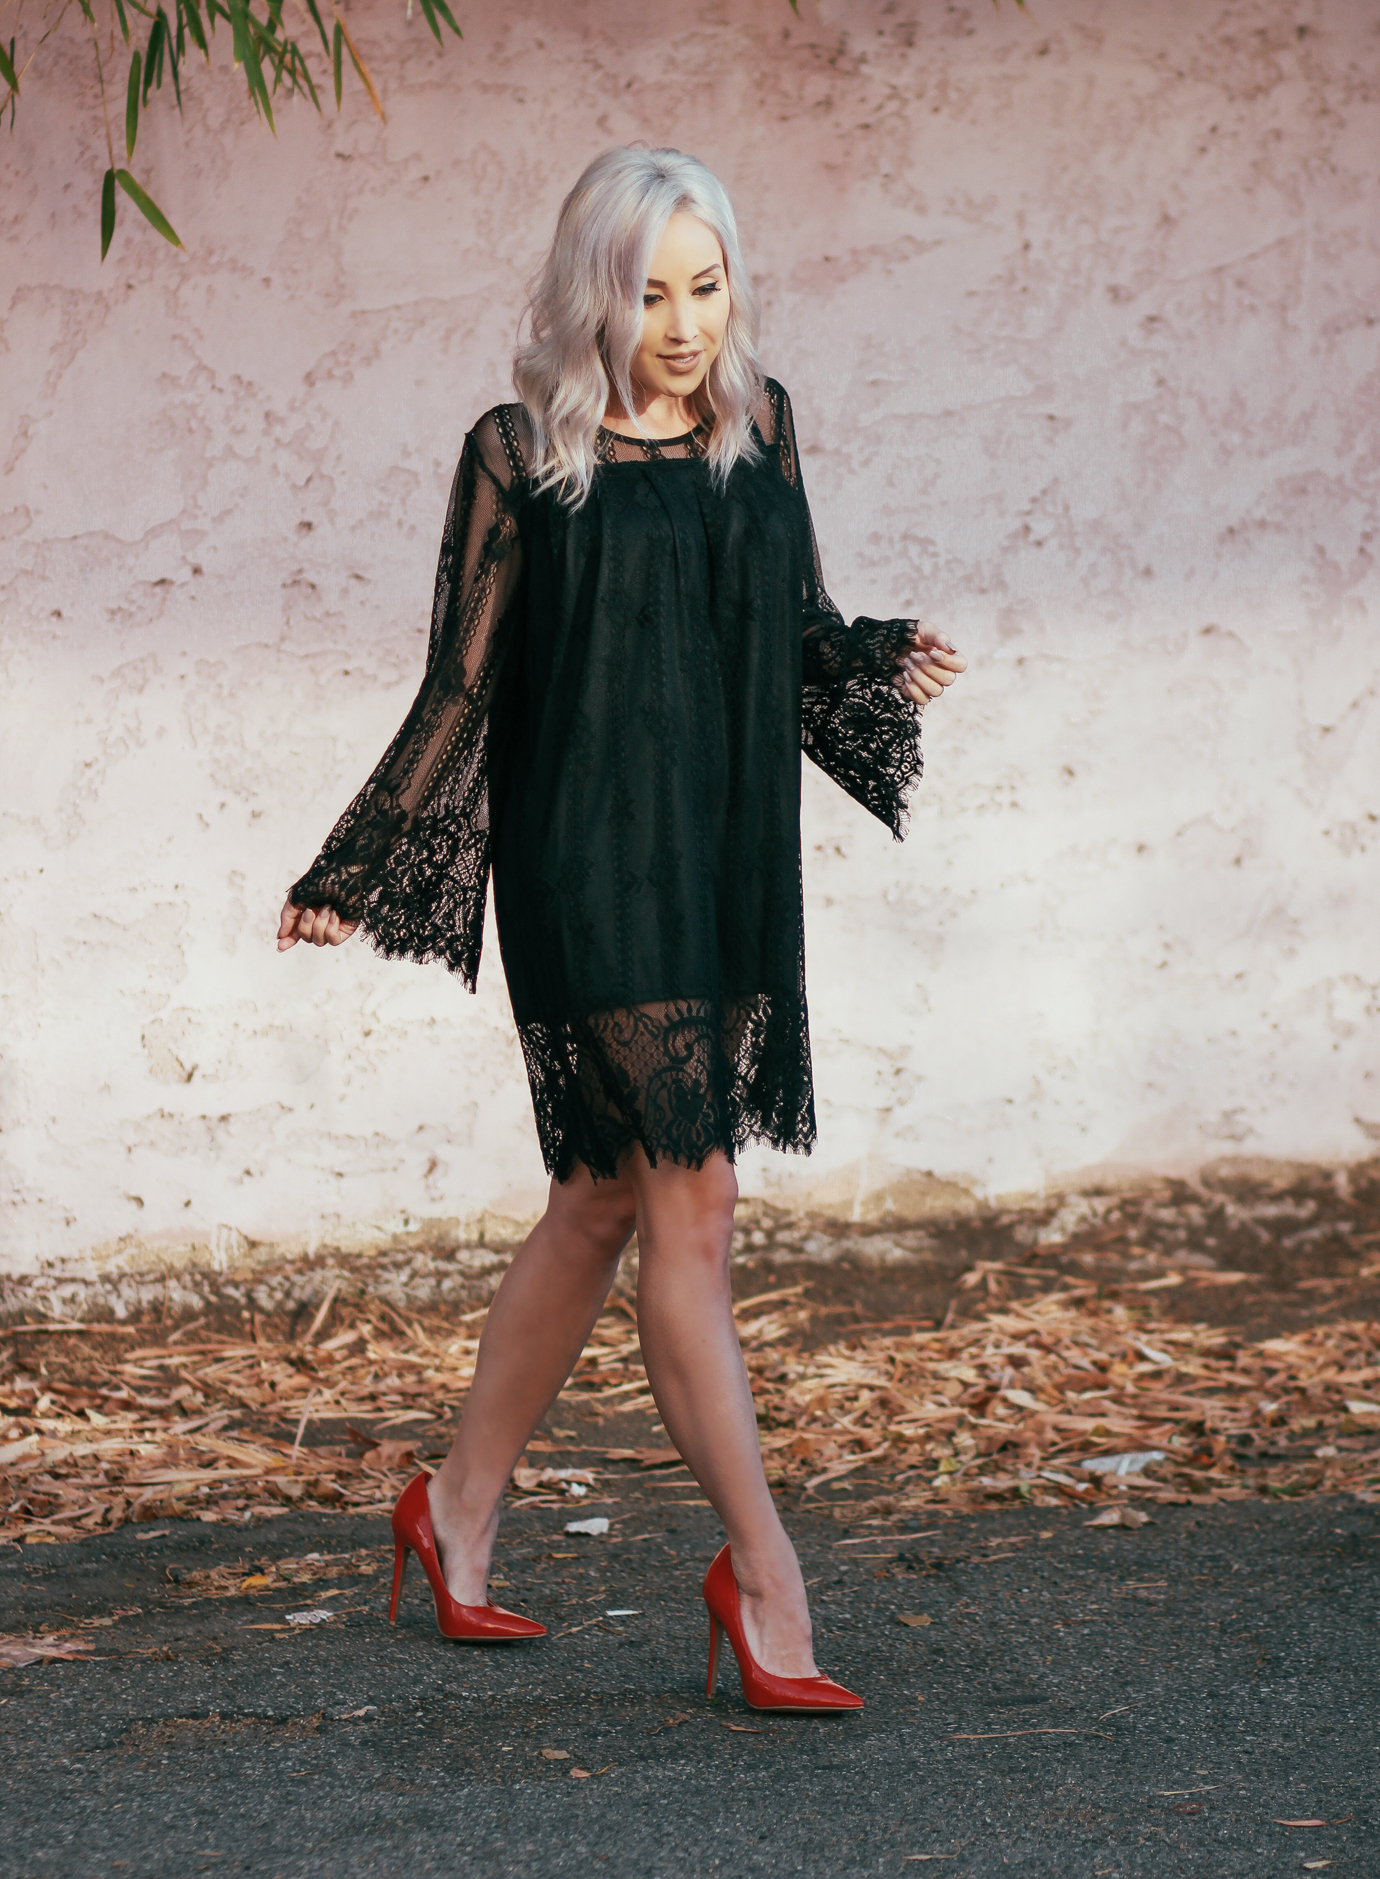 Blondie in the City | Black Lace Bell Sleeve Dress @Official_SheIn | Street Style #OOTD